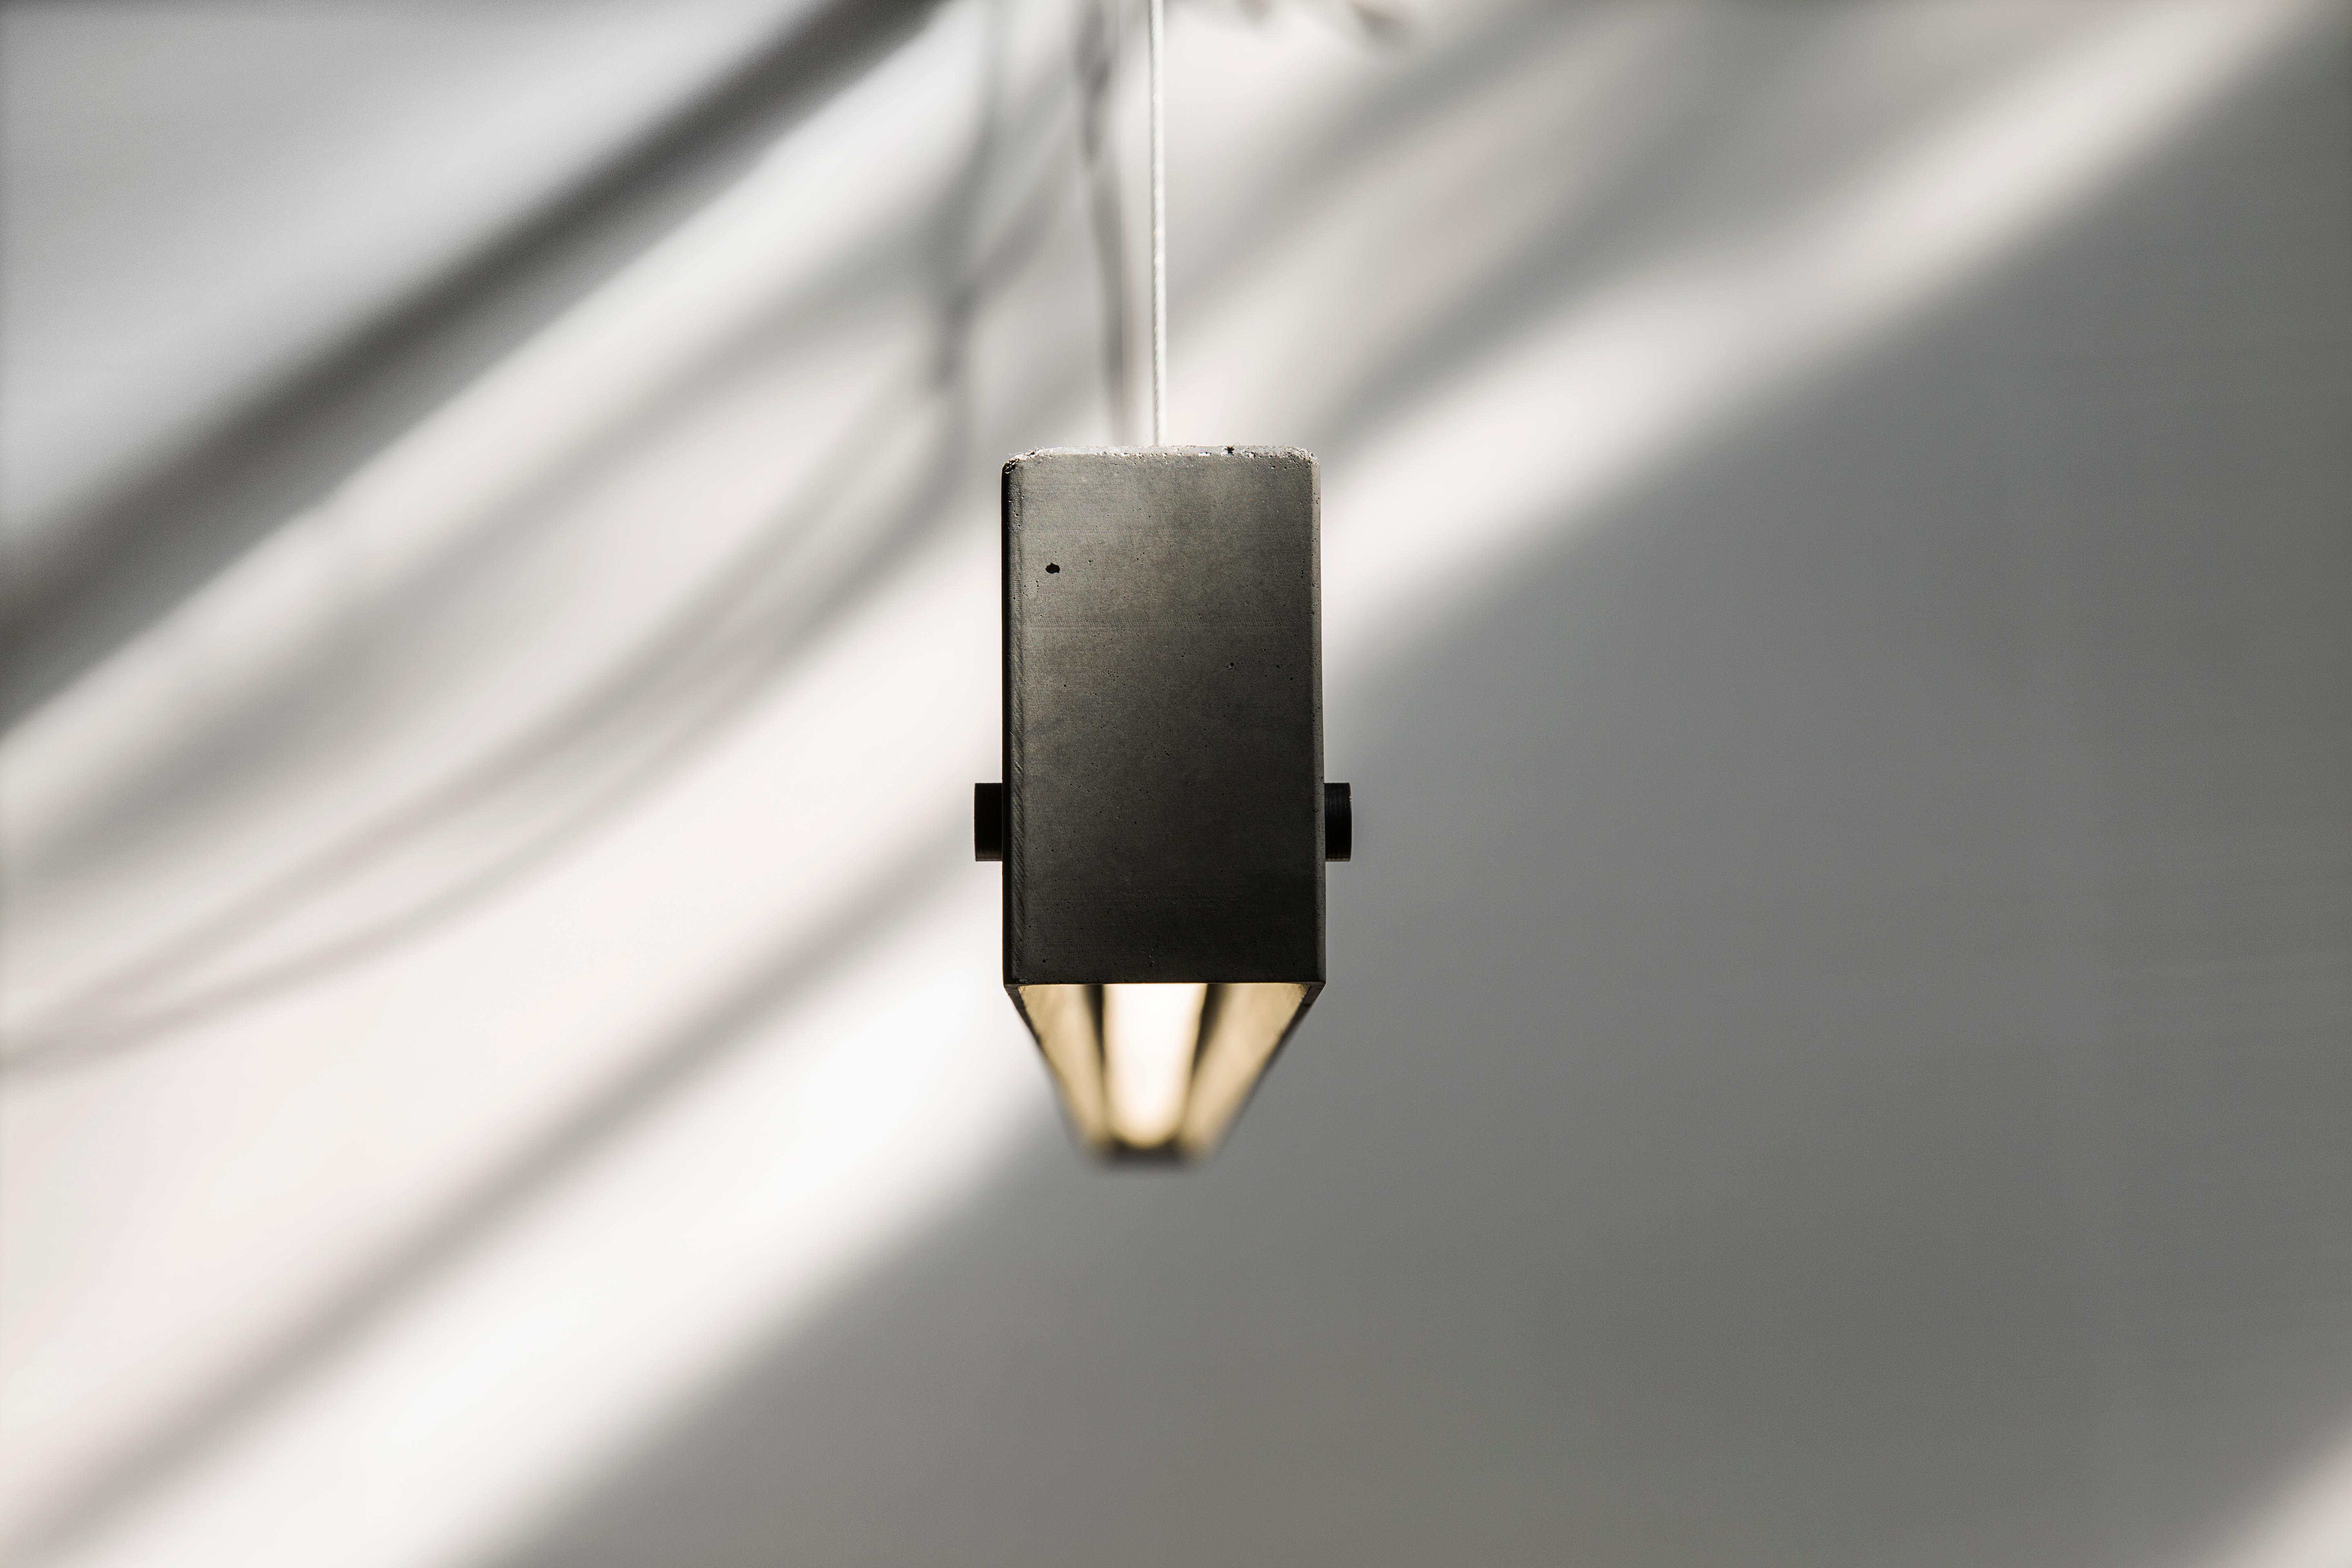 Chinese Concrete and Aluminum Pendant Lamp, “Yi, ” from Concrete Collection by Bentu